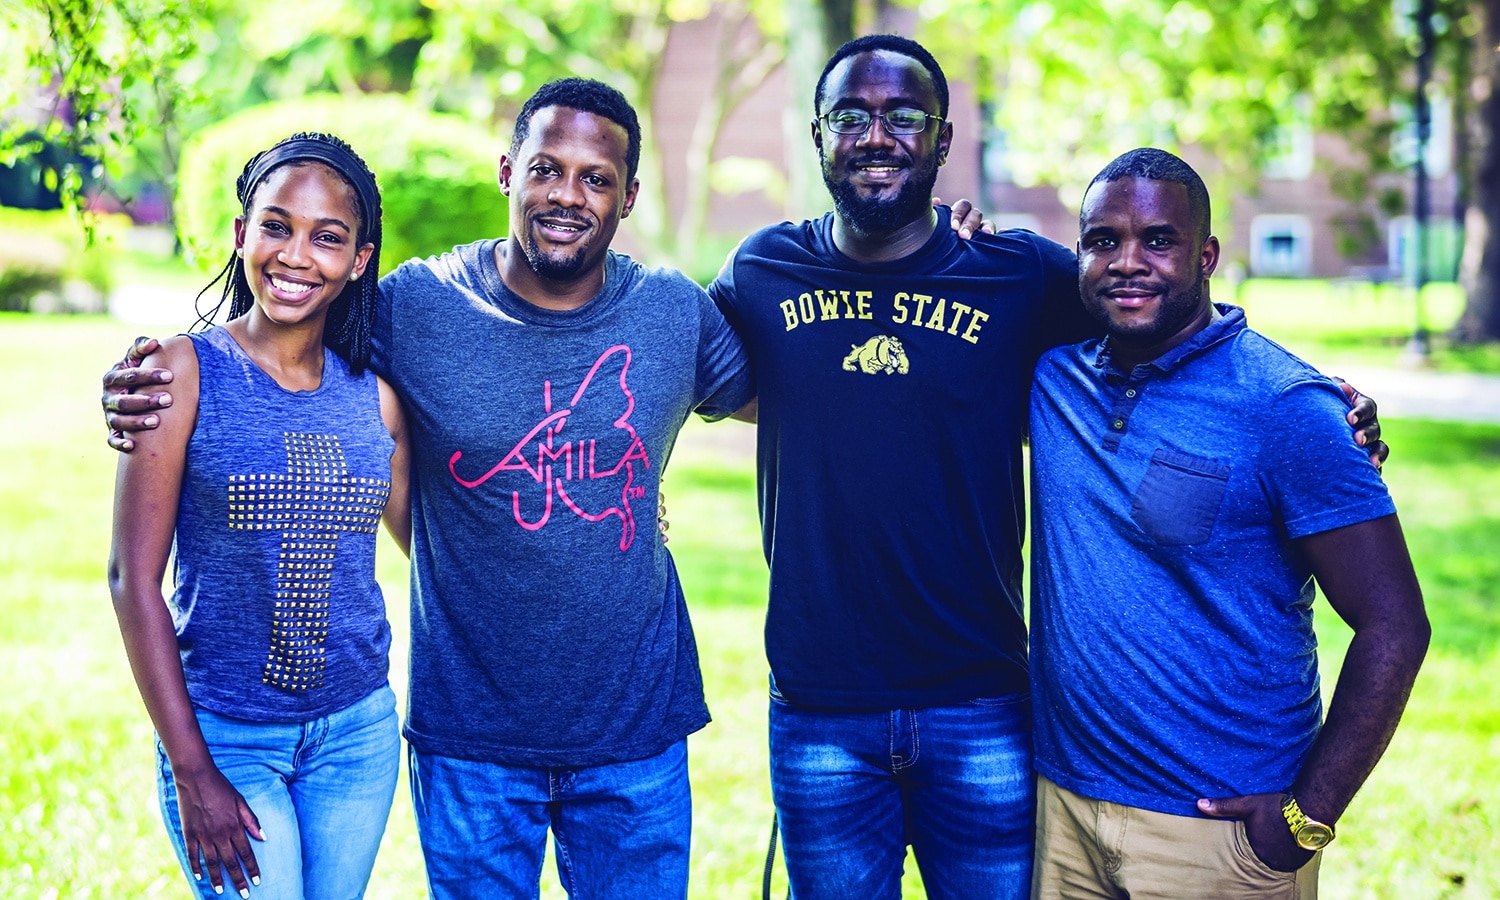 Four young adults at Bowie State University posing for a picture in a park, surrounded by trees.